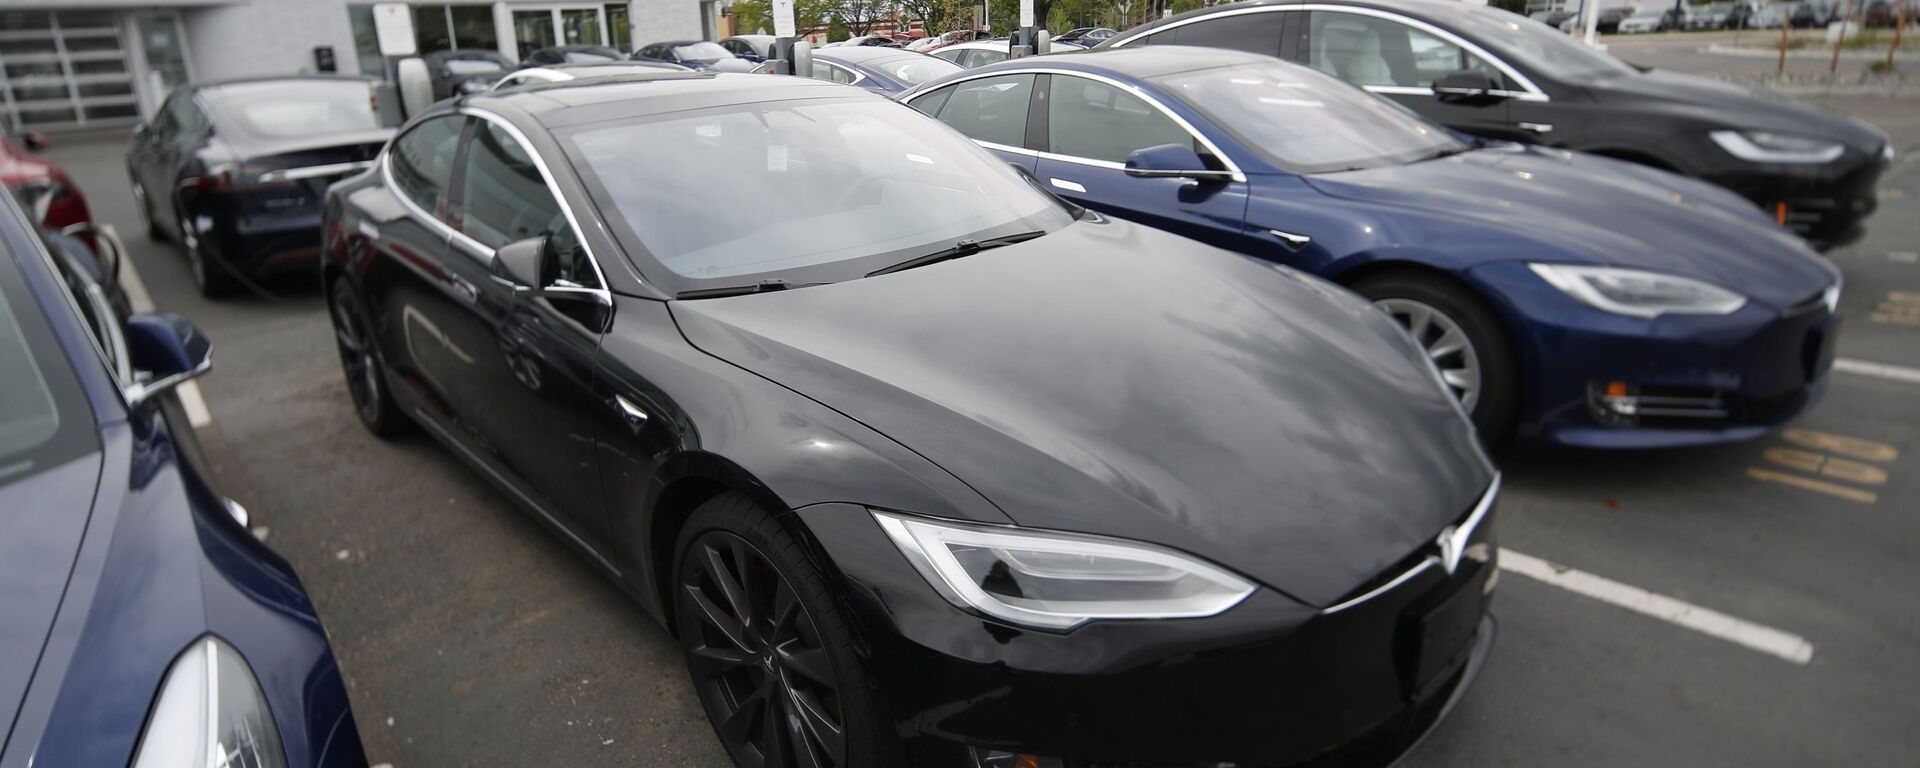 -In this Sunday, May 19, 2019, file photograph, a line of unsold 2019 Model S sedans sits at a Tesla dealership in Littleton, Colo.  - Sputnik International, 1920, 19.05.2021